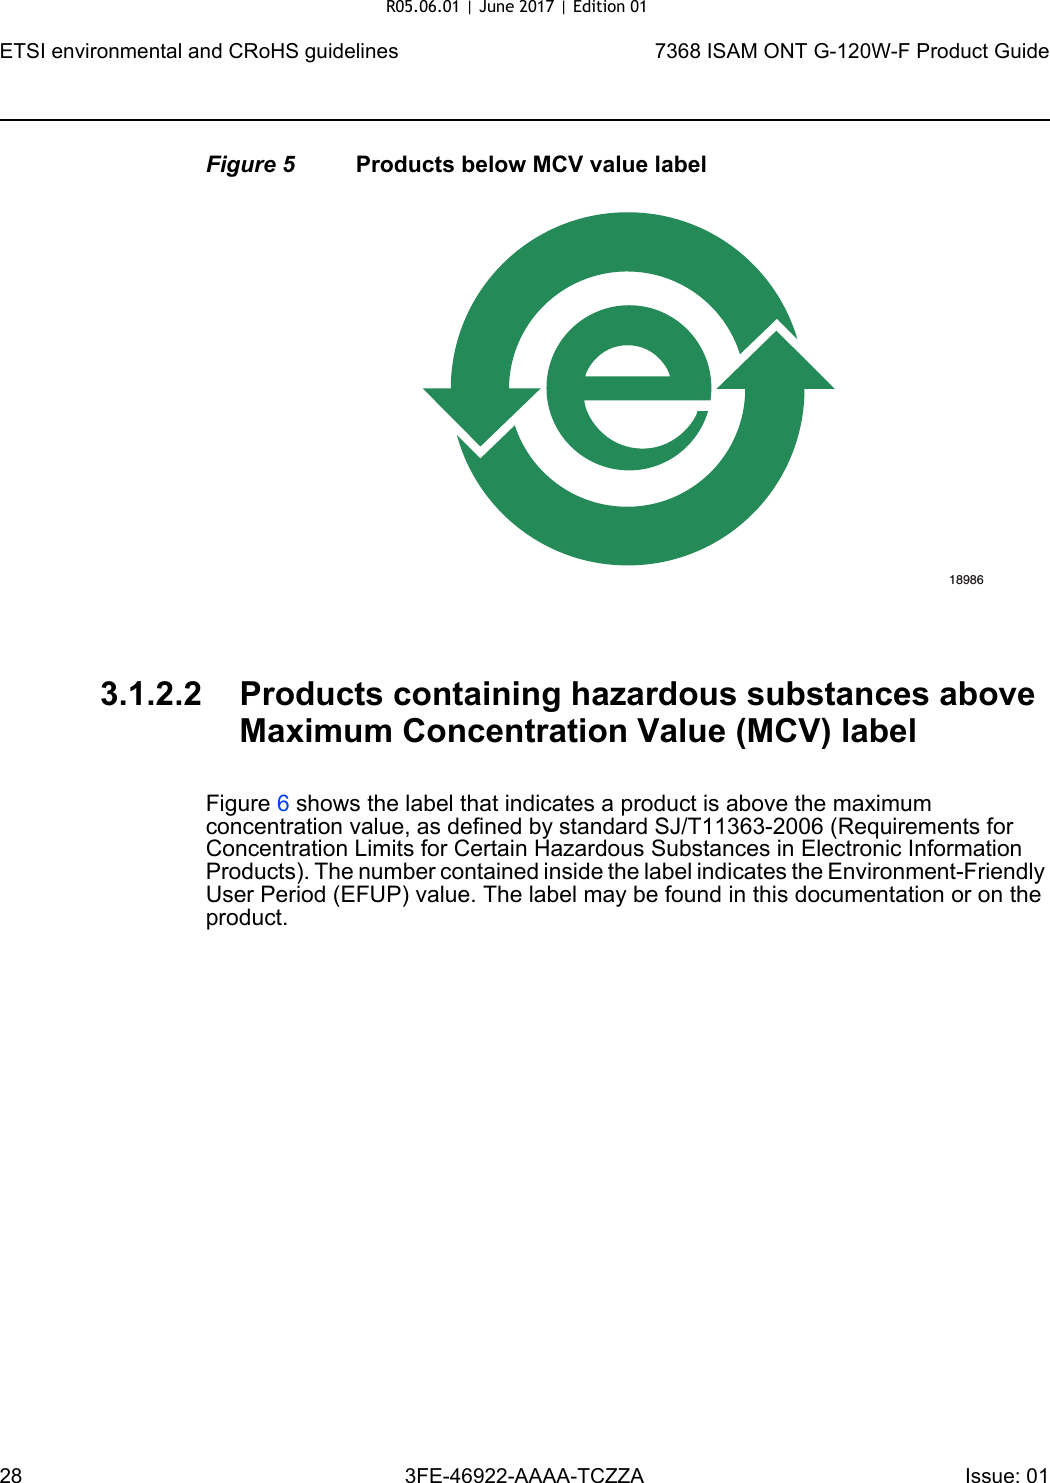 ETSI environmental and CRoHS guidelines287368 ISAM ONT G-120W-F Product Guide3FE-46922-AAAA-TCZZA Issue: 01 Figure 5 Products below MCV value label3.1.2.2 Products containing hazardous substances above Maximum Concentration Value (MCV) labelFigure 6 shows the label that indicates a product is above the maximum concentration value, as defined by standard SJ/T11363-2006 (Requirements for Concentration Limits for Certain Hazardous Substances in Electronic Information Products). The number contained inside the label indicates the Environment-Friendly User Period (EFUP) value. The label may be found in this documentation or on the product.18986R05.06.01 | June 2017 | Edition 01 